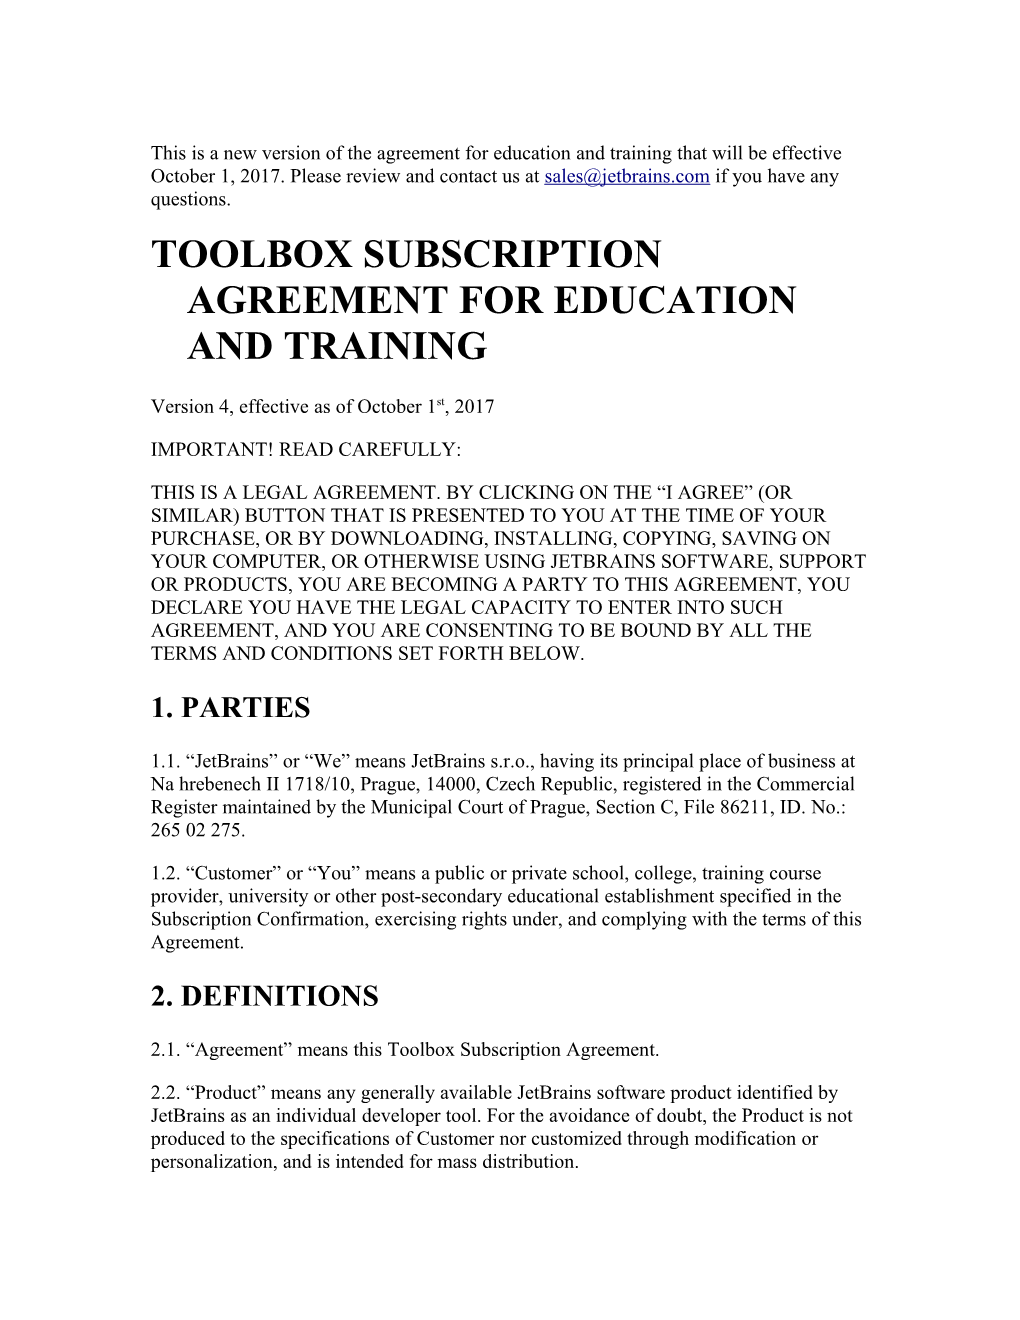 Toolbox Subscription Agreement for Education and Training